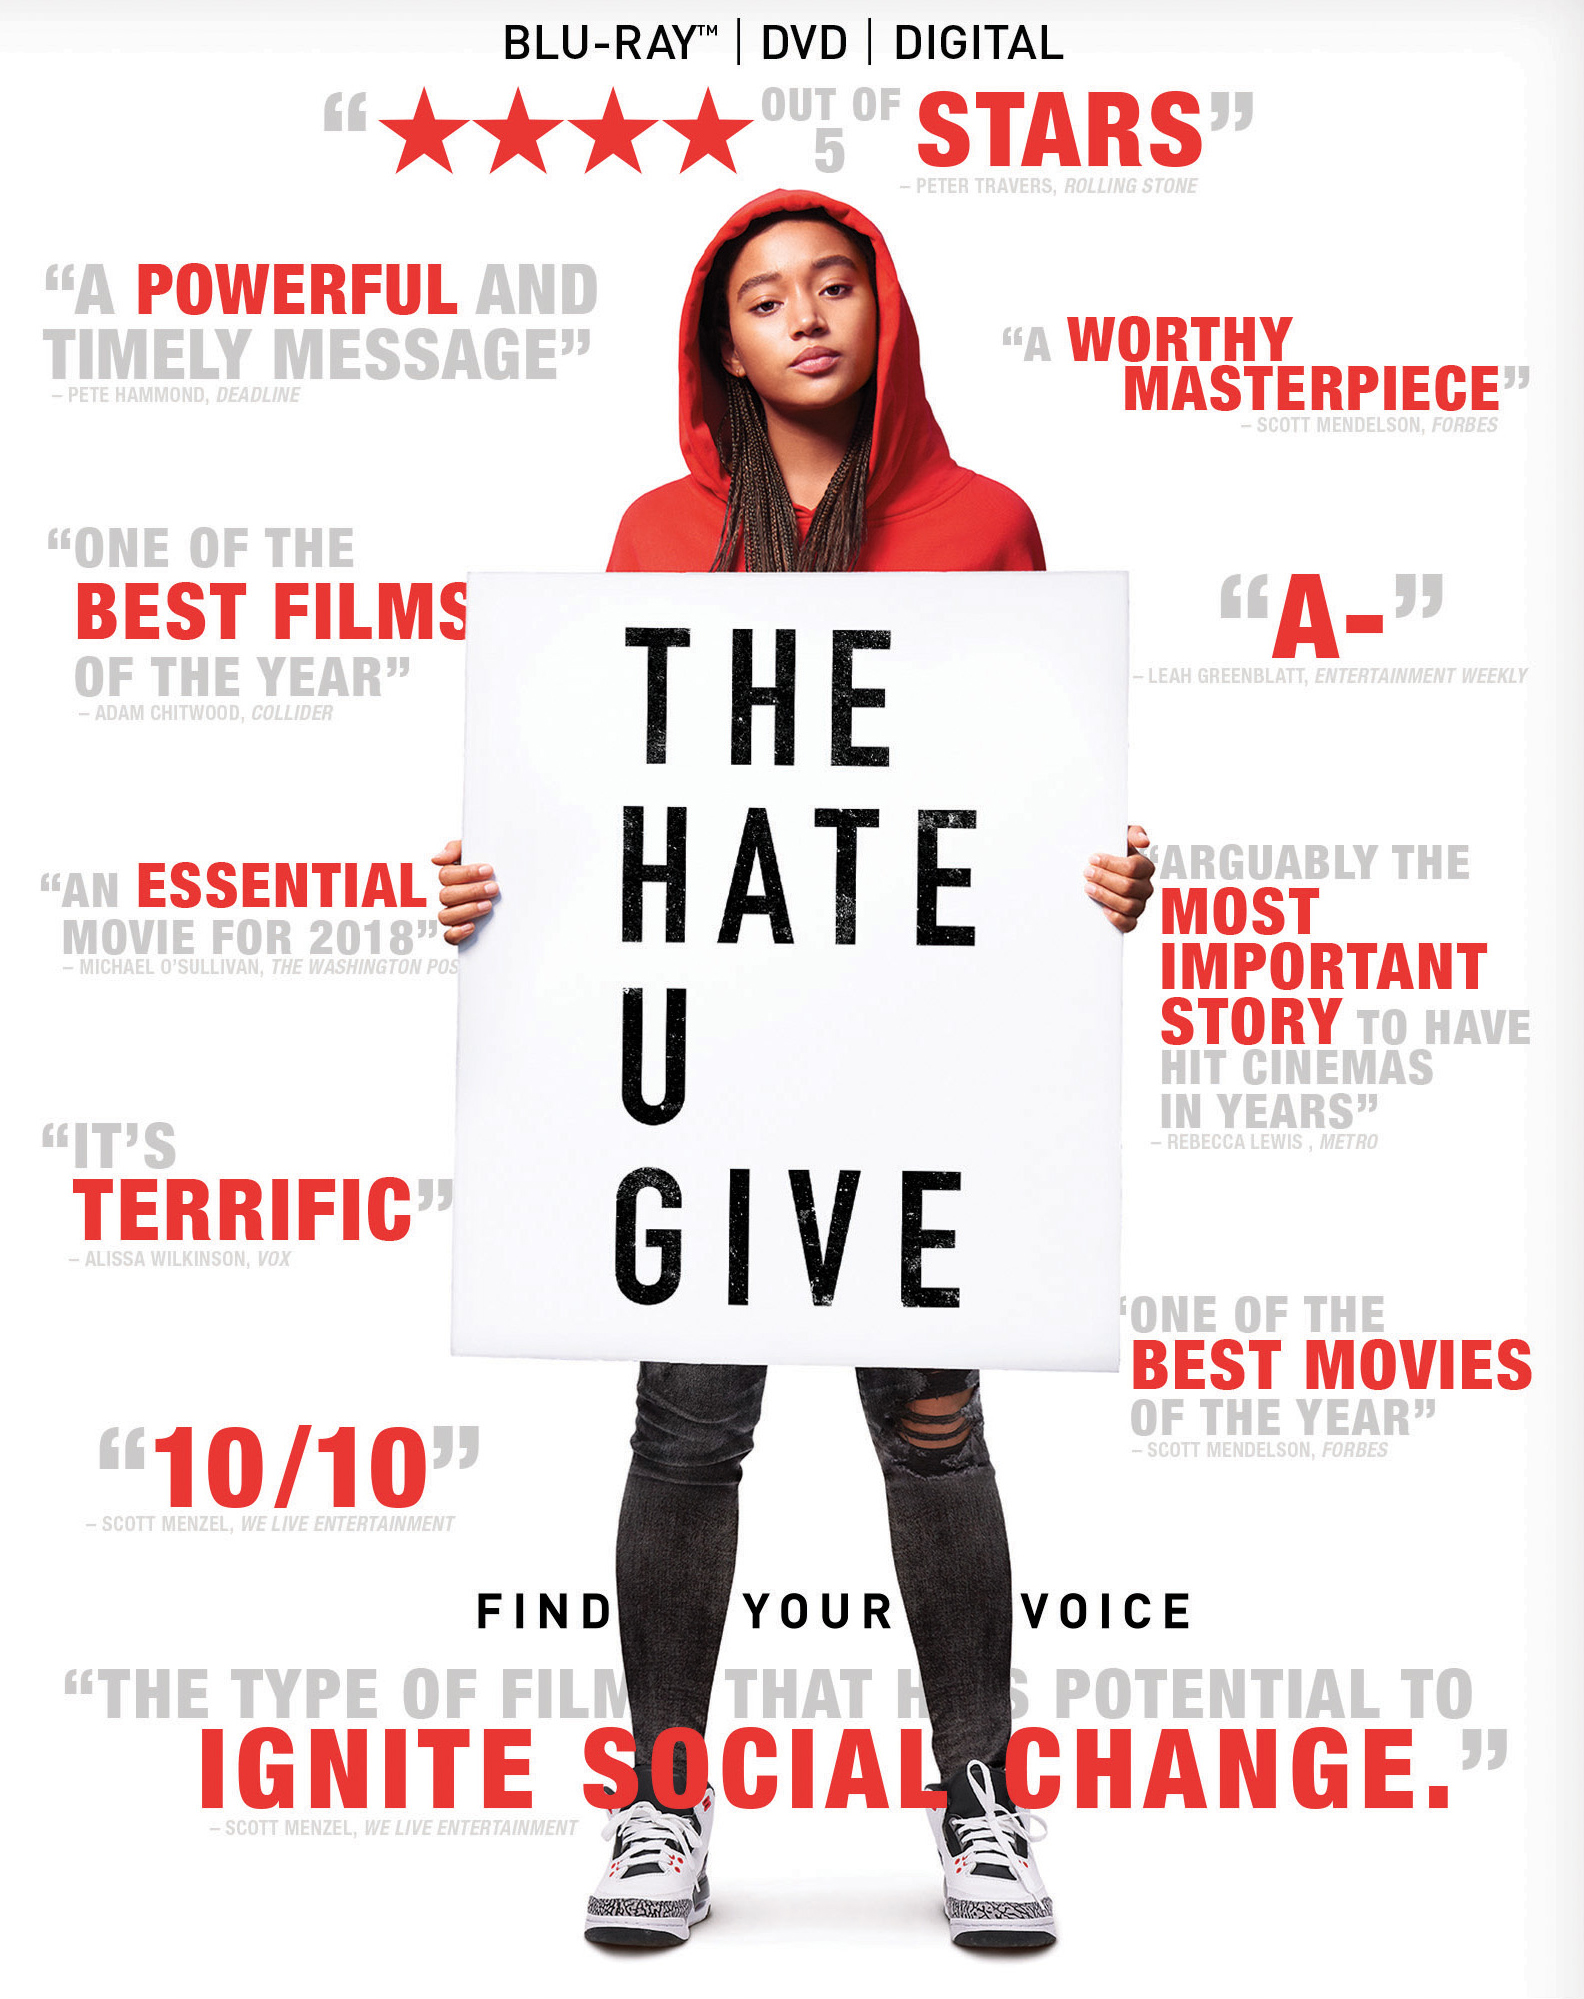 Cover Art-Starr stands with large sign saying "The Hate U Give", in front of positive critic reviews for story